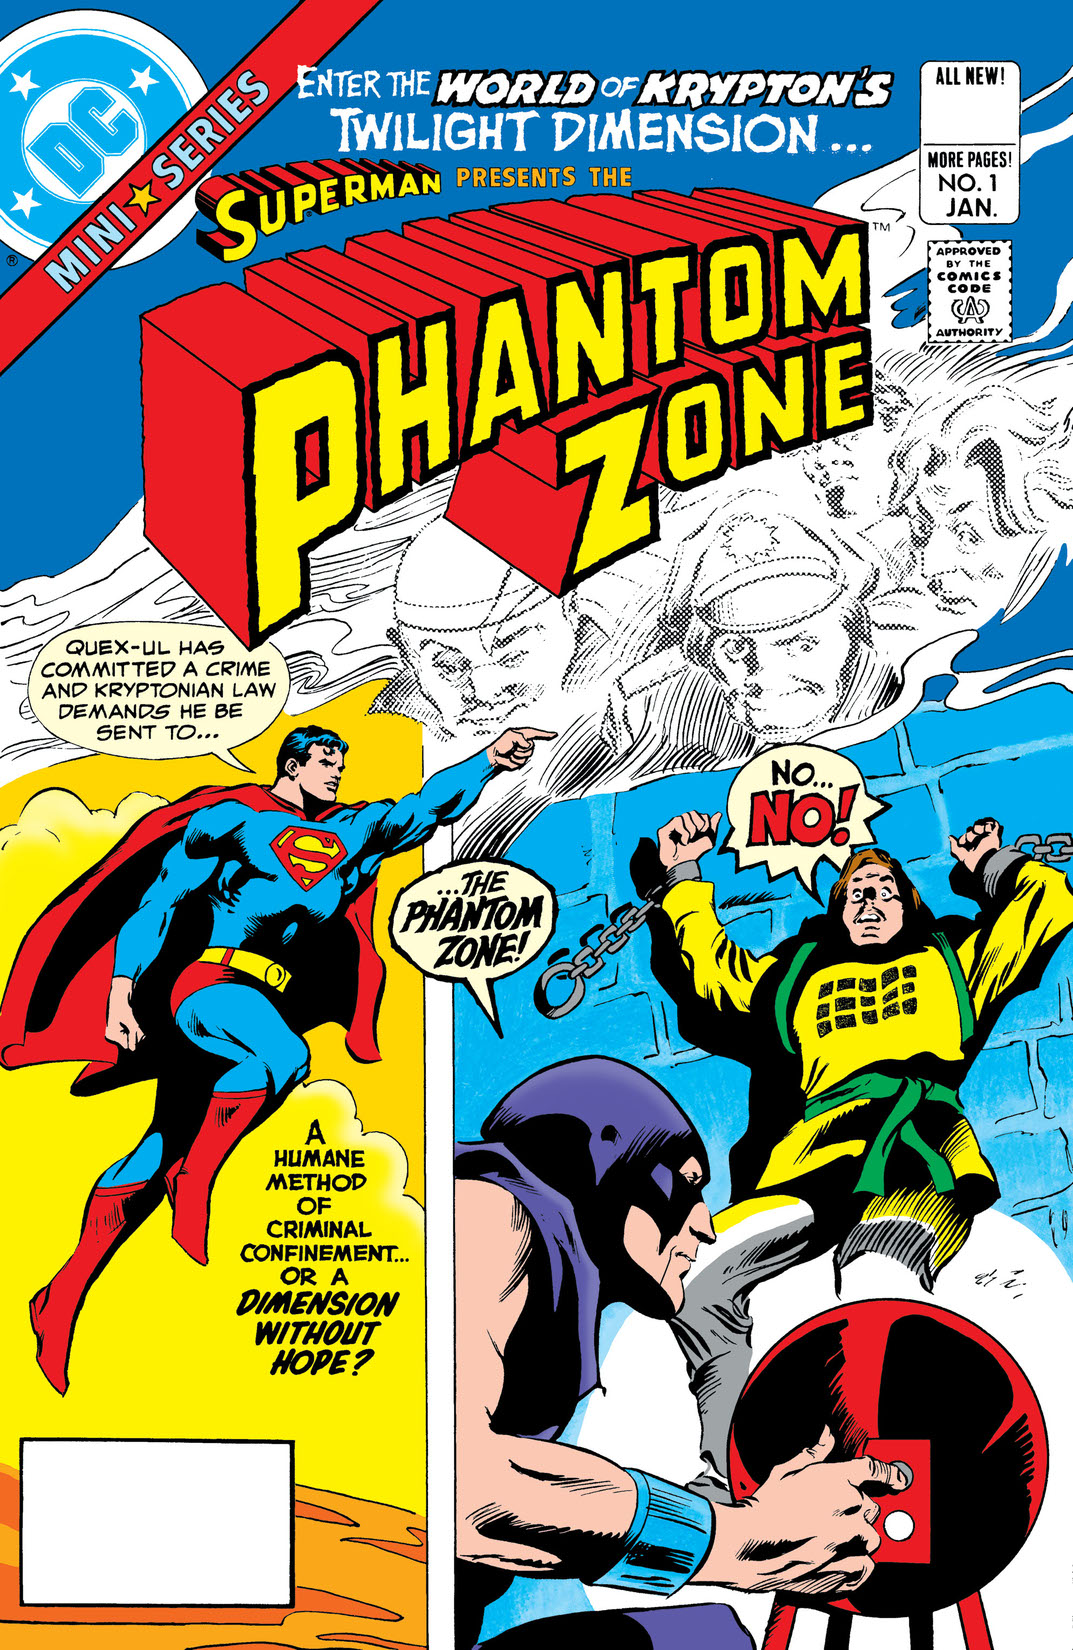 Superman Presents The Phantom Zone #1 preview images